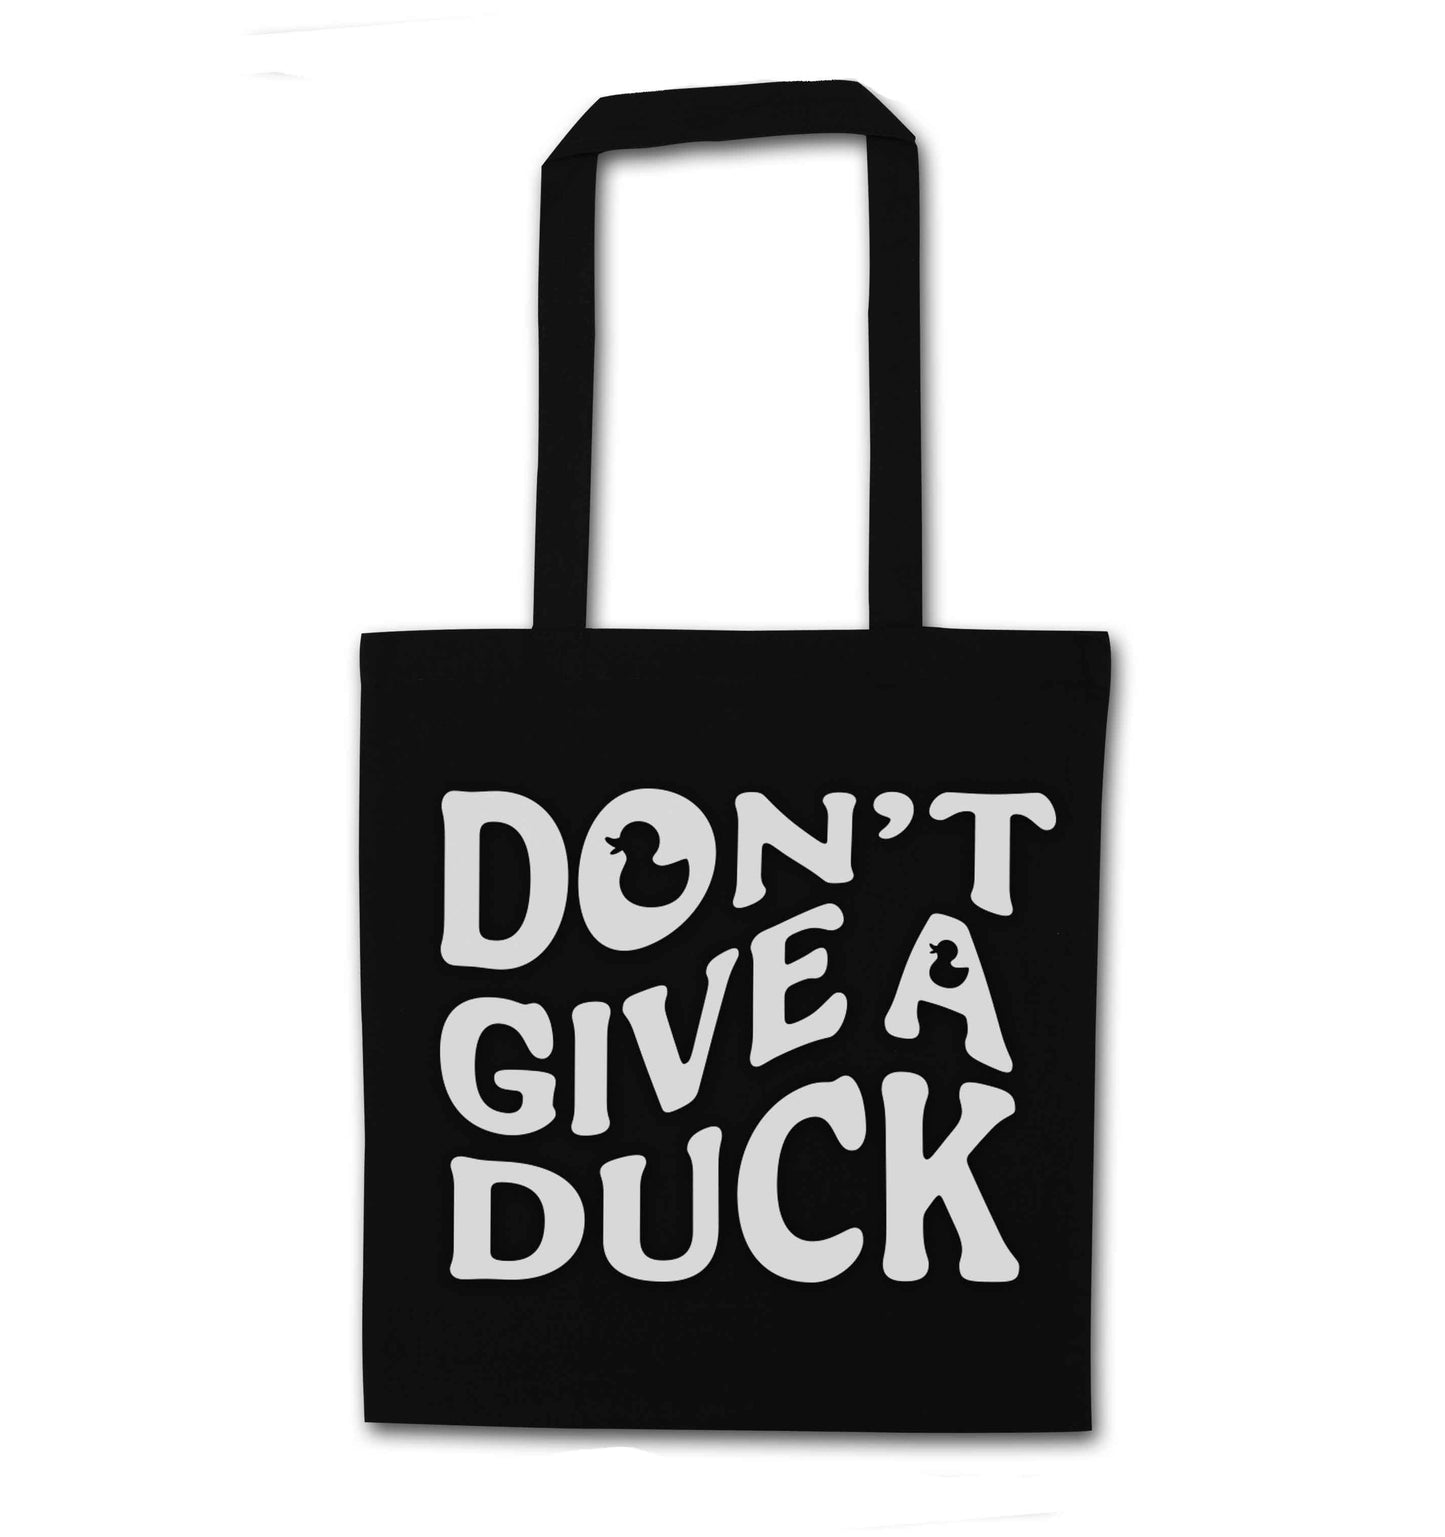 Don't give a duck black tote bag